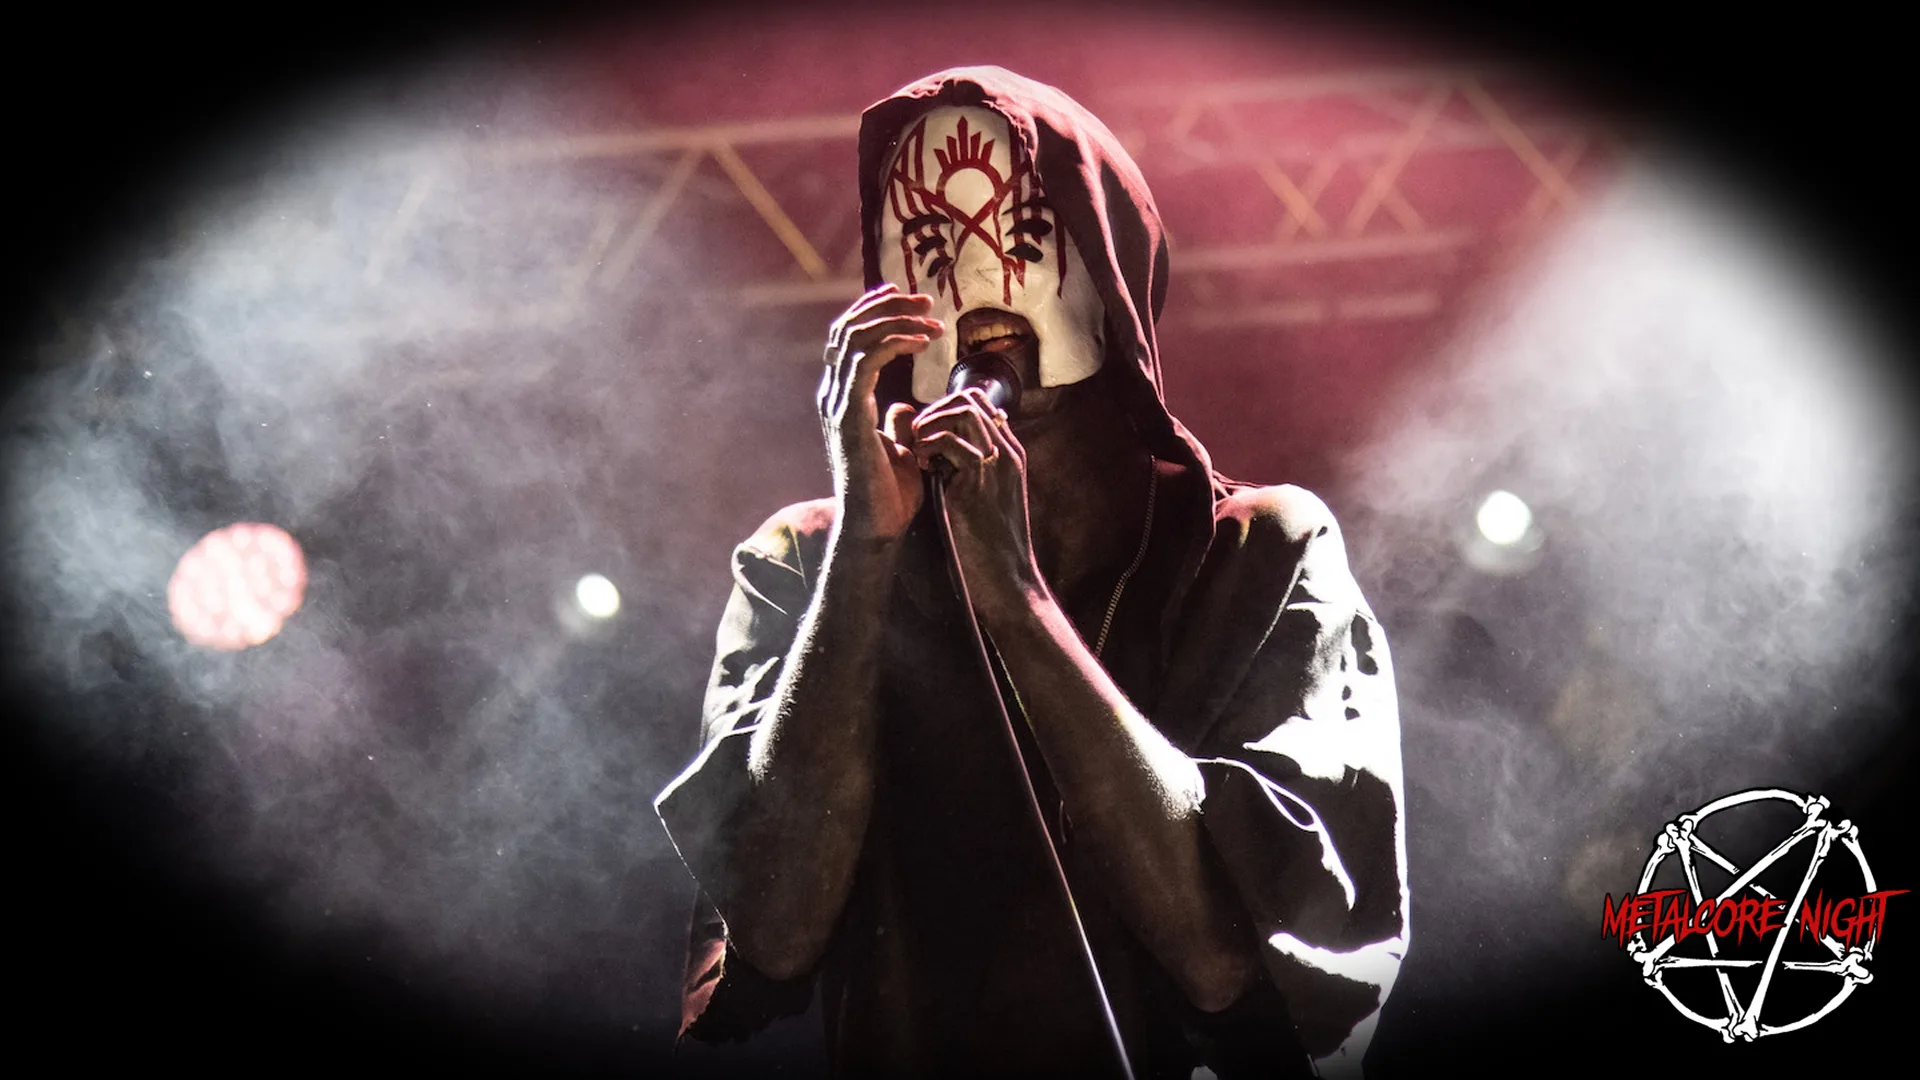 This image portrays a dramatic stage scene featuring a musician from the band Sleep Token, taken during a live performance. The band is played regularly at Metalcore Night events. The band member is centrally framed and shrouded in a mysterious aura. They wear a distinct mask with a red, intricate emblem resembling a sigil, adding a ritualistic element to their appearance. A hooded garment cloaks their figure, merging with the dark backdrop of the stage. The setting is low-lit, with the exception of spotlights that cast a soft glow on the performer, enhancing the intensity and focus on them. The musician's stance is one of deep engagement, with their hands cupping a microphone close to the mask's mouth opening, suggesting they are in the midst of a passionate vocal performance. The atmosphere is further electrified by a misty haze that envelopes the scene, catching the stage lights and creating a dreamlike quality. This adds to the enigmatic and otherworldly vibe synonymous with Sleep Token's image. The bottom right corner features a graphic logo for Metalcore Night, comprising an inverted pentagram and circular saw blade, reinforcing the edgy and hardcore theme of the event.